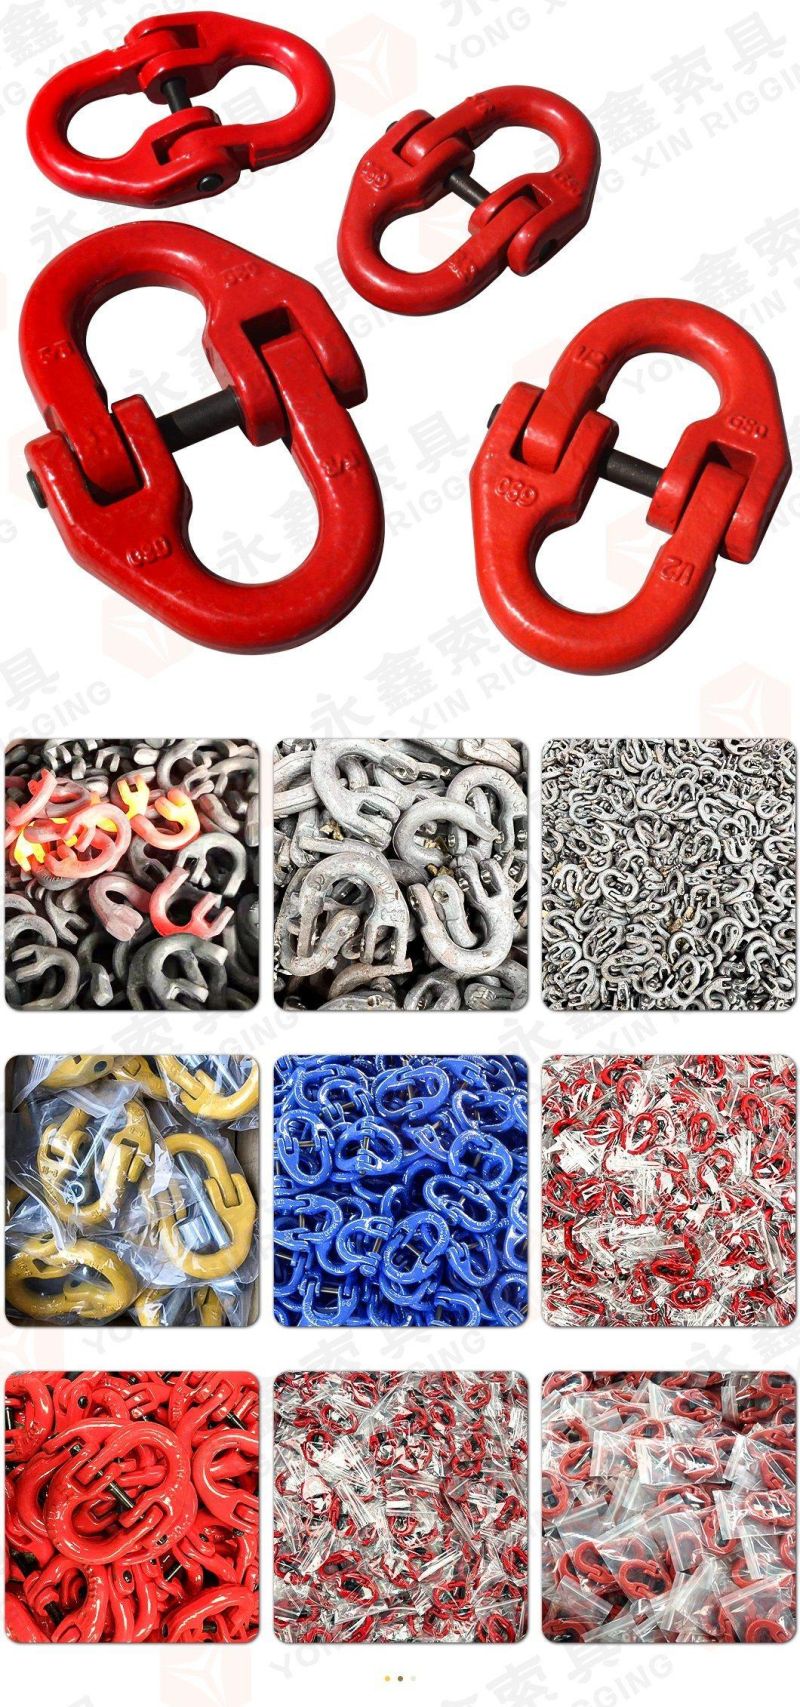 Hot Sale Forged Grade 80 Chain Hammerlock Connecting Links for Chain Slings